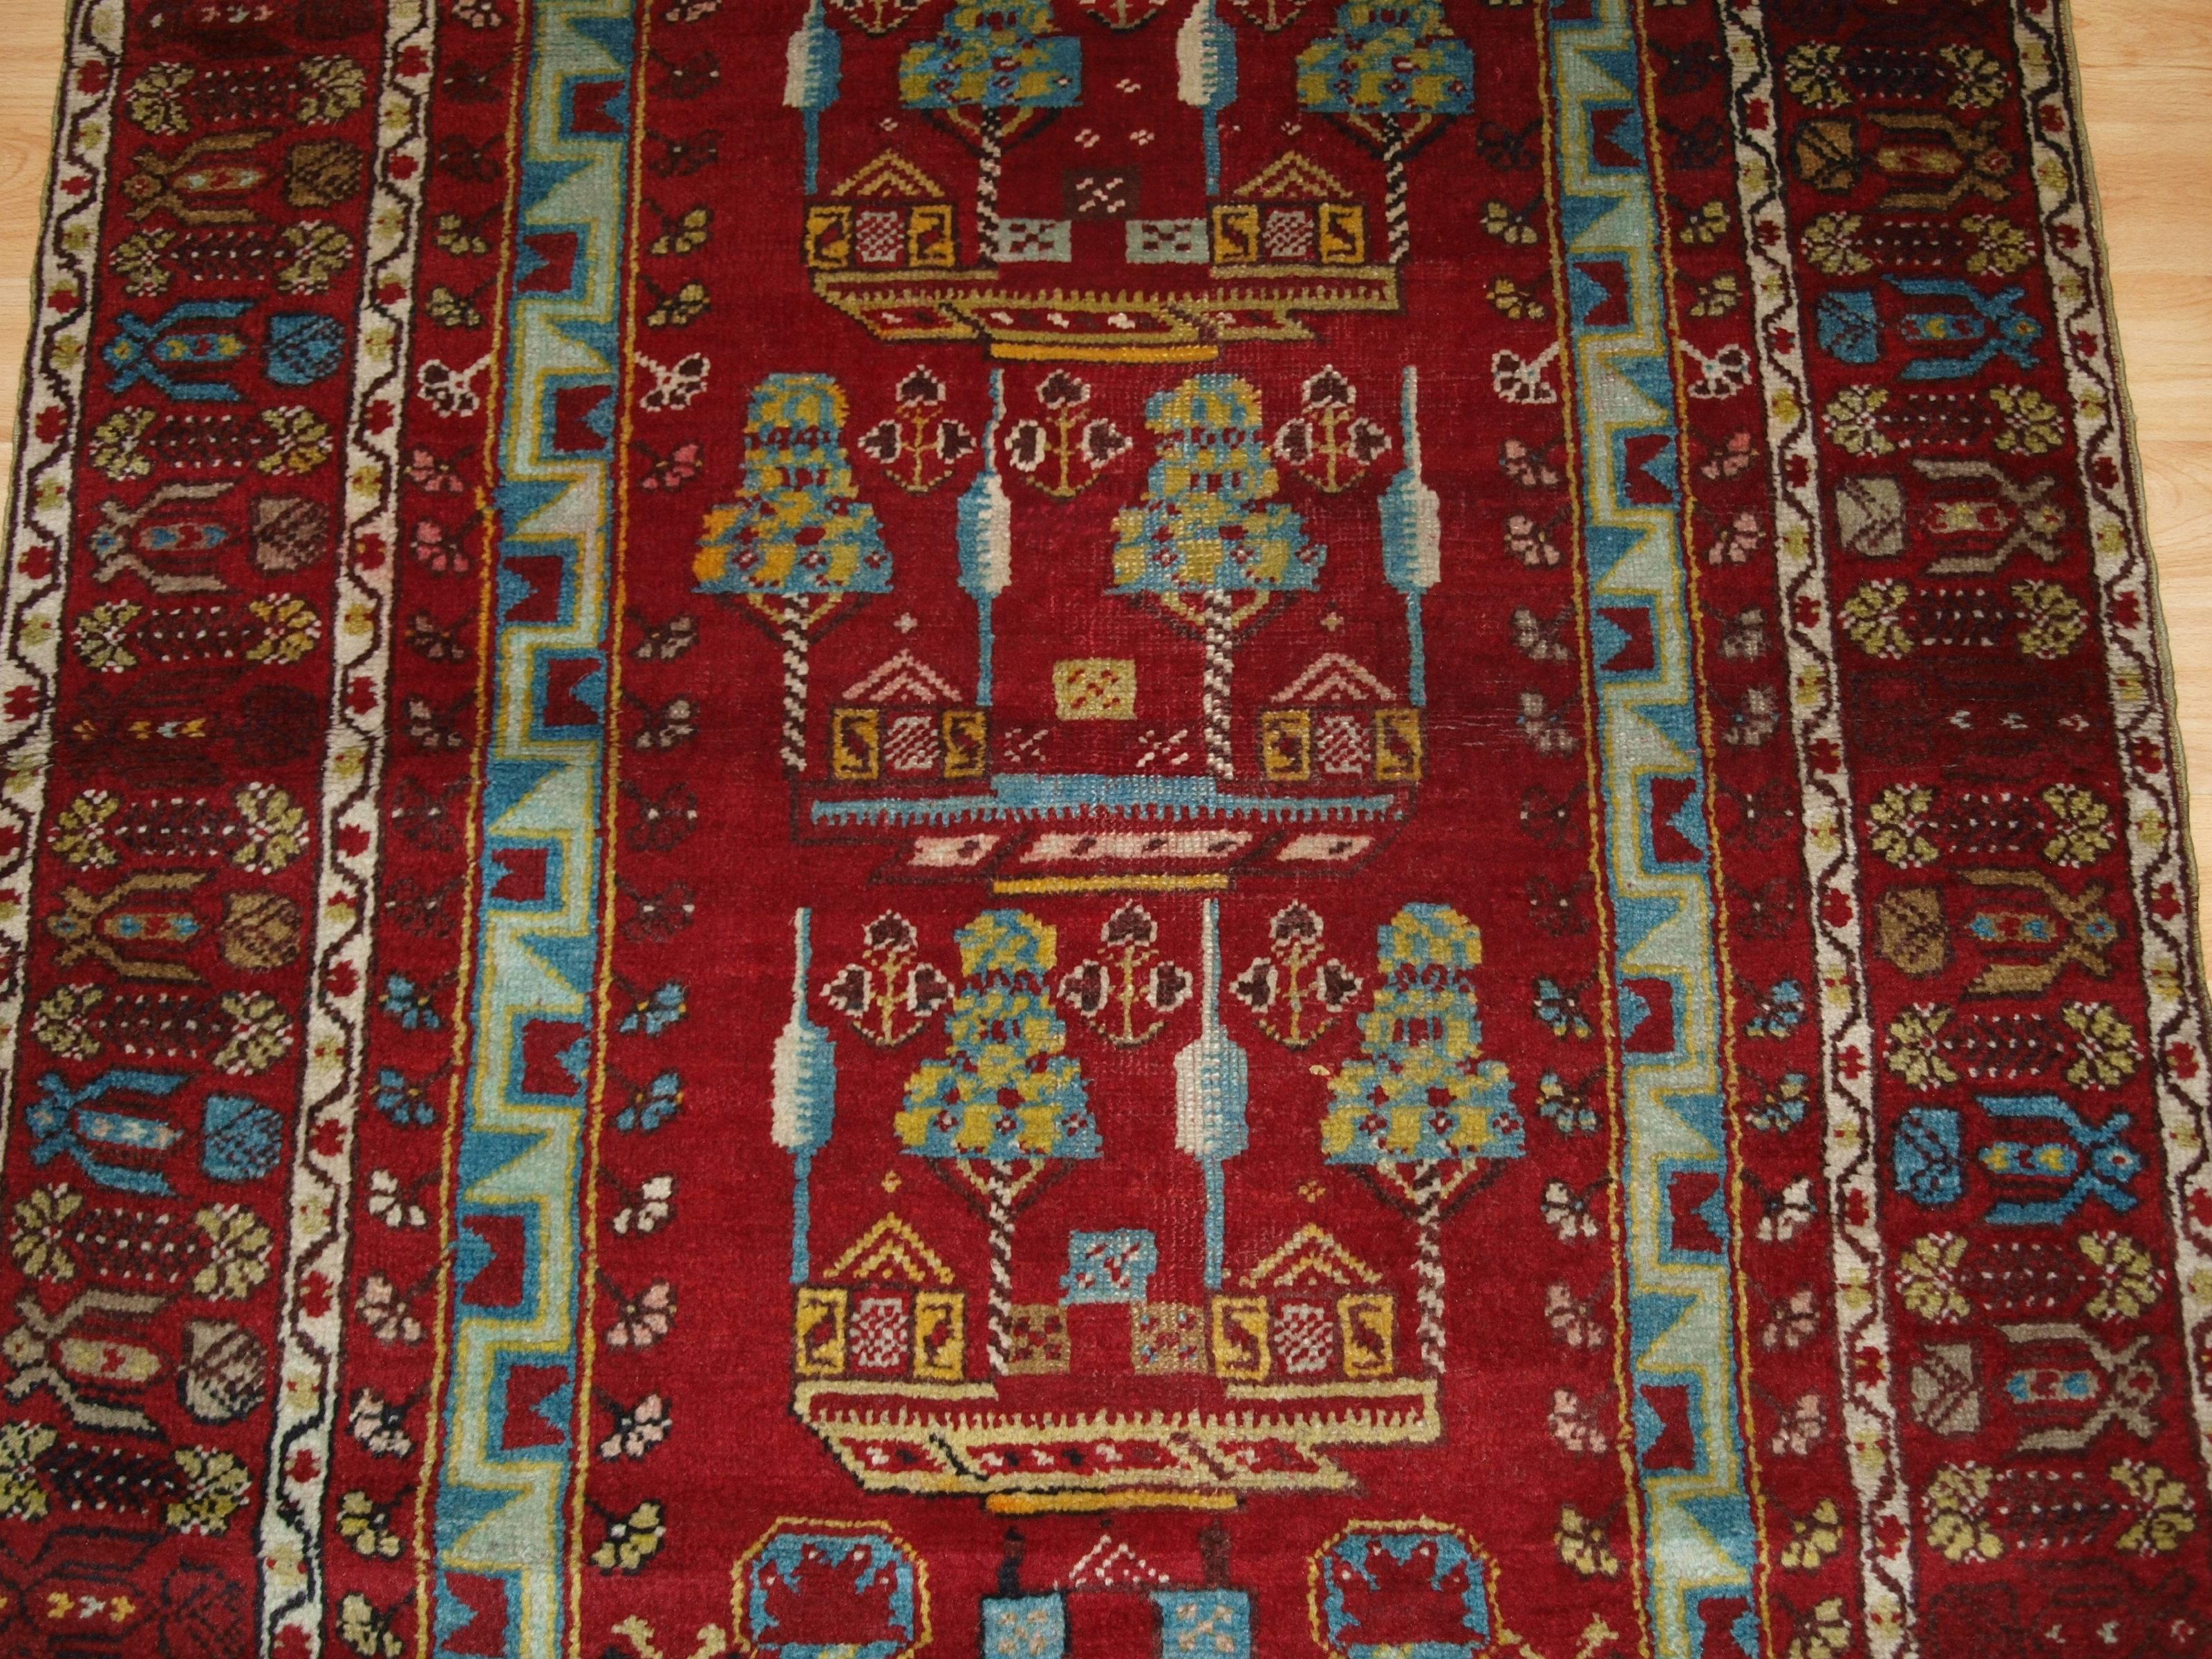 Antique Anatolian Kirsehir Village Prayer Rug of Traditional Design, circa 1900 In Excellent Condition For Sale In Moreton-in-Marsh, GB